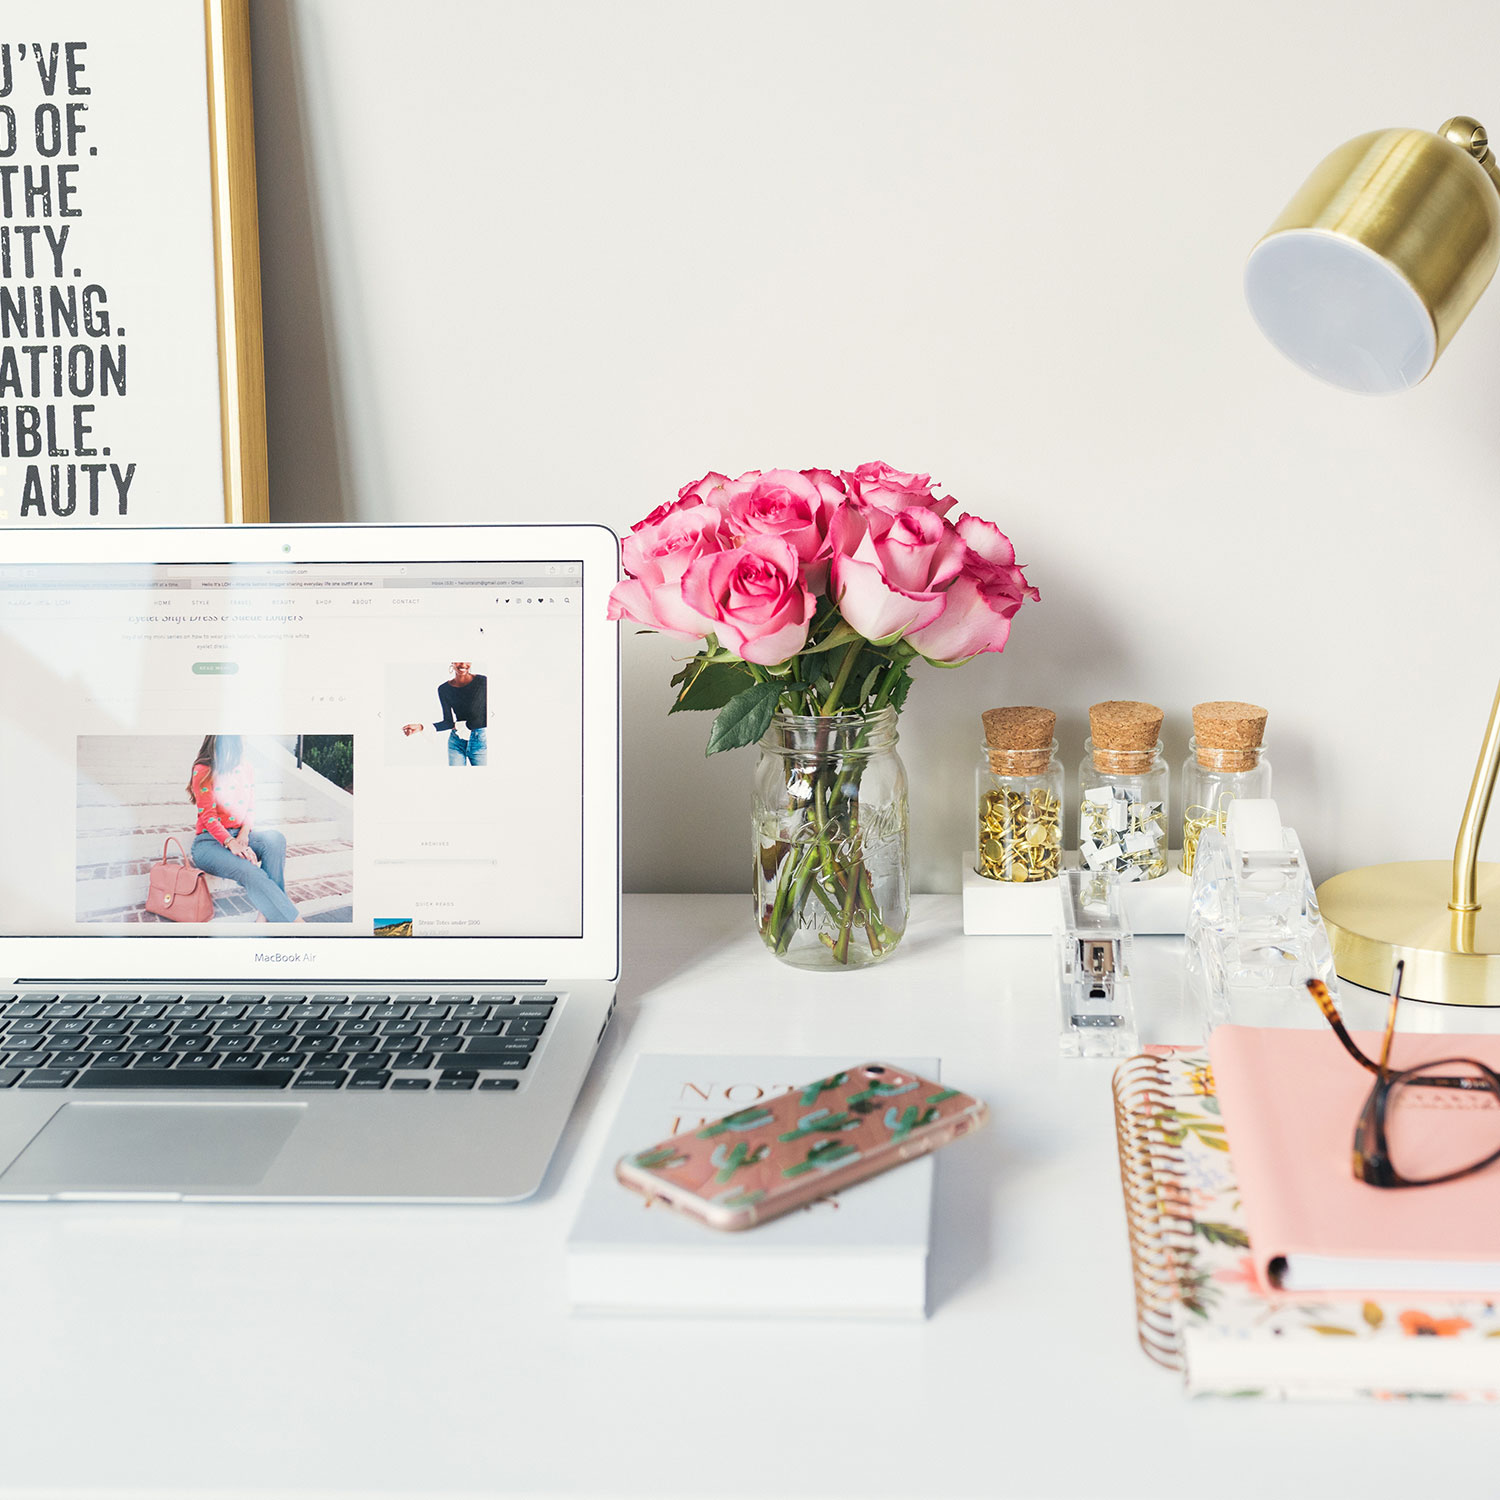 Vibrant photo of a desk filled with a laptop, vase of flowers, notebook, lamp, and glasses